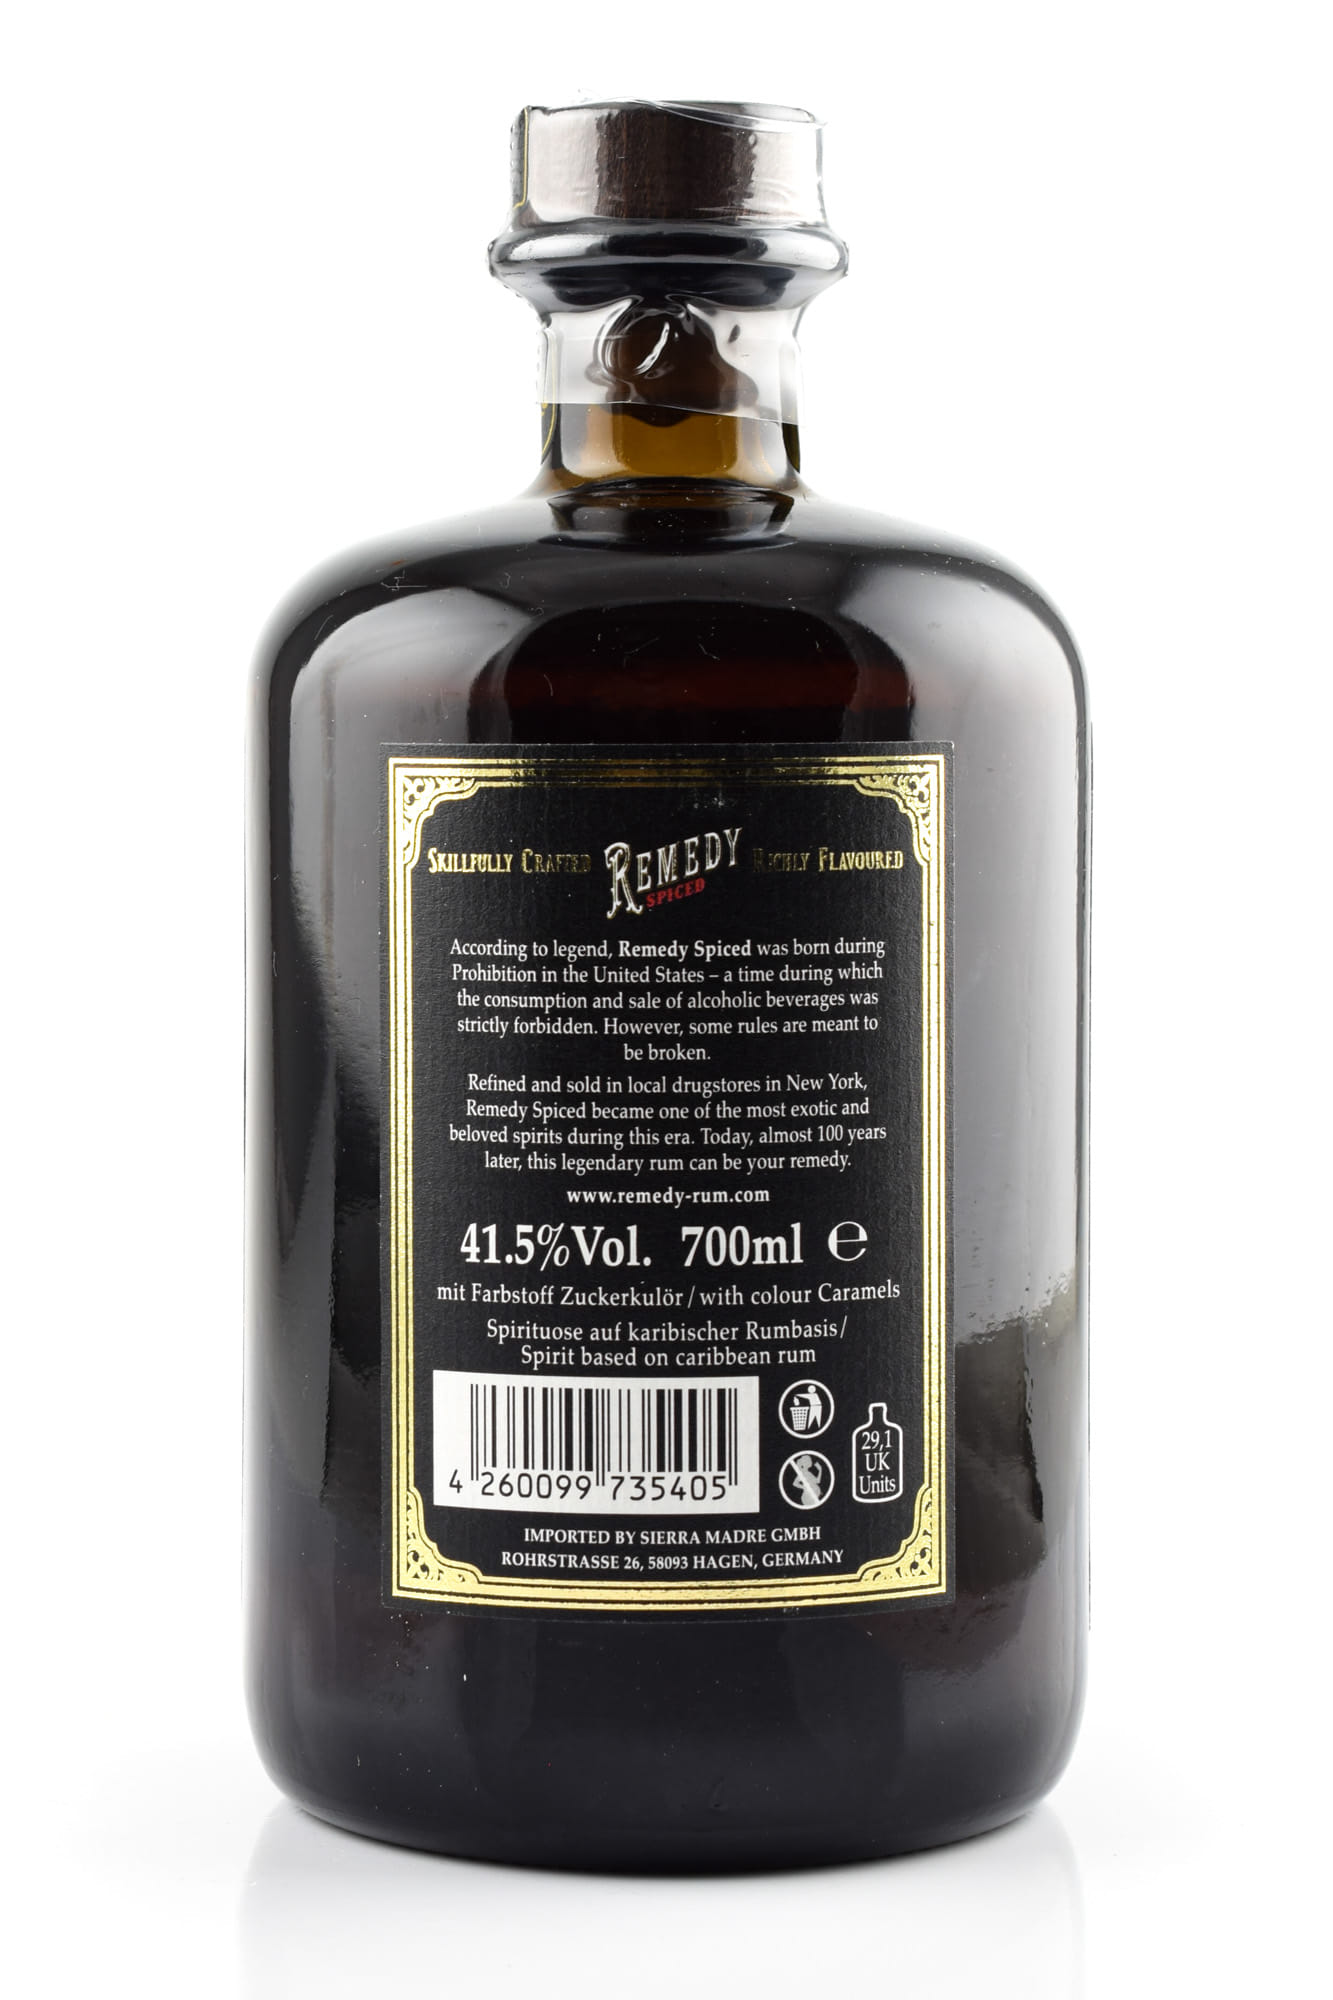 Remedy Spiced Golden 1920s now! Home Malts | Home explore of at Edition >> Malts of